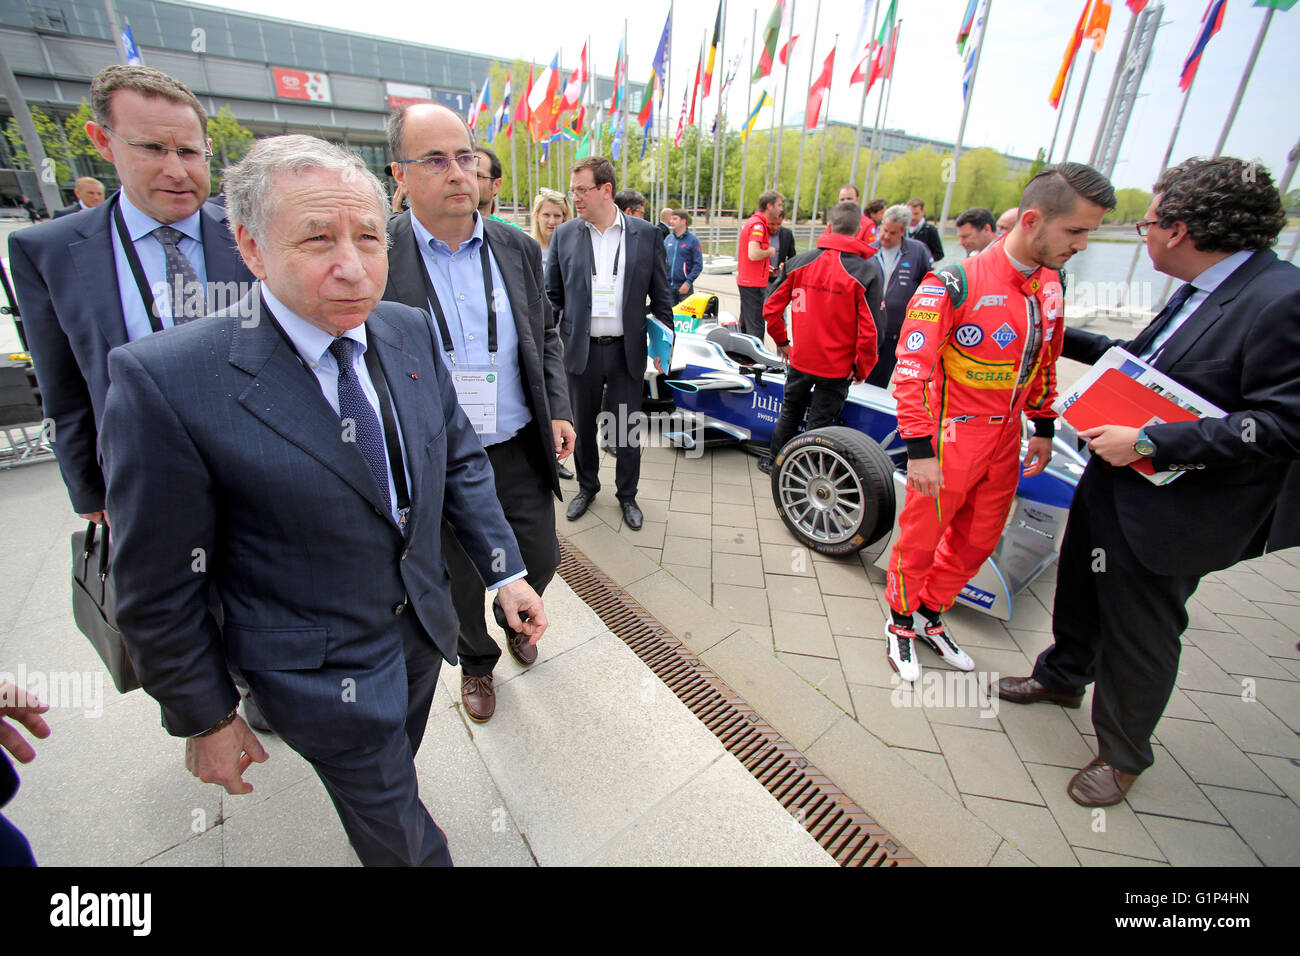 Leipzig, Germany. 18th May, 2016. Jean Todt (front L), president of the International Automobile Federation (FIA), heads to the opening ceremony of the world summit of transport ministers after the presentation of an electric Formula E racing car in Leipzig, Germany, 18 May 2016. Some 1,000 participants from 60 countries are expected to attend the three-day summit held by the International Transport Forum of the Organisation for Economic Co-operation and Development (OECD). Photo: JAN WOITAS/dpa/Alamy Live News Stock Photo